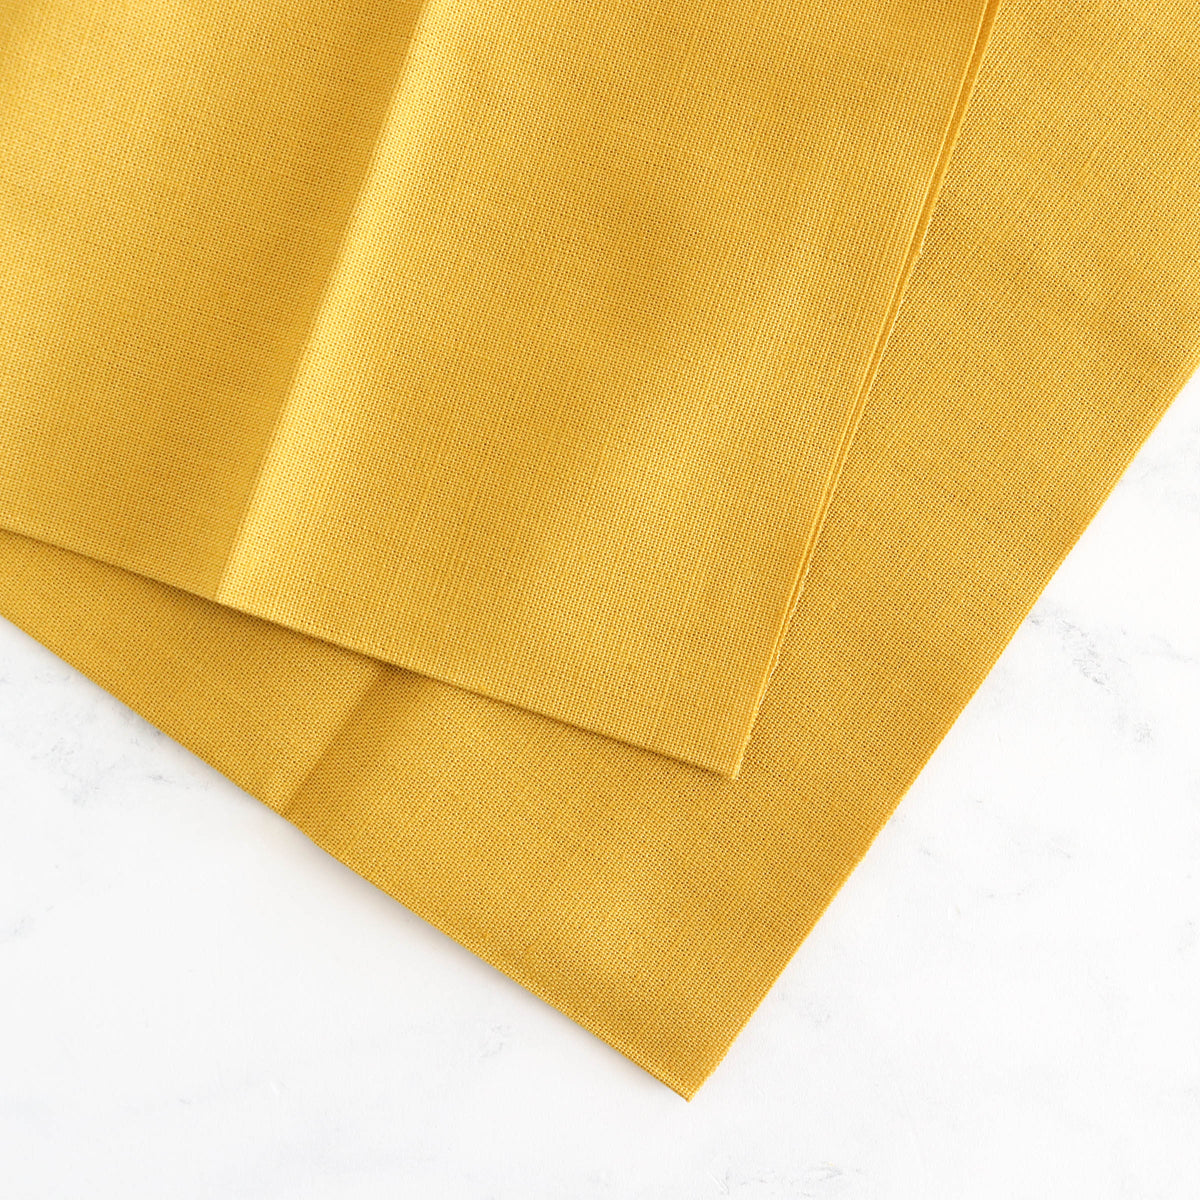 Cotton Hand Embroidery Fabric - Mustard